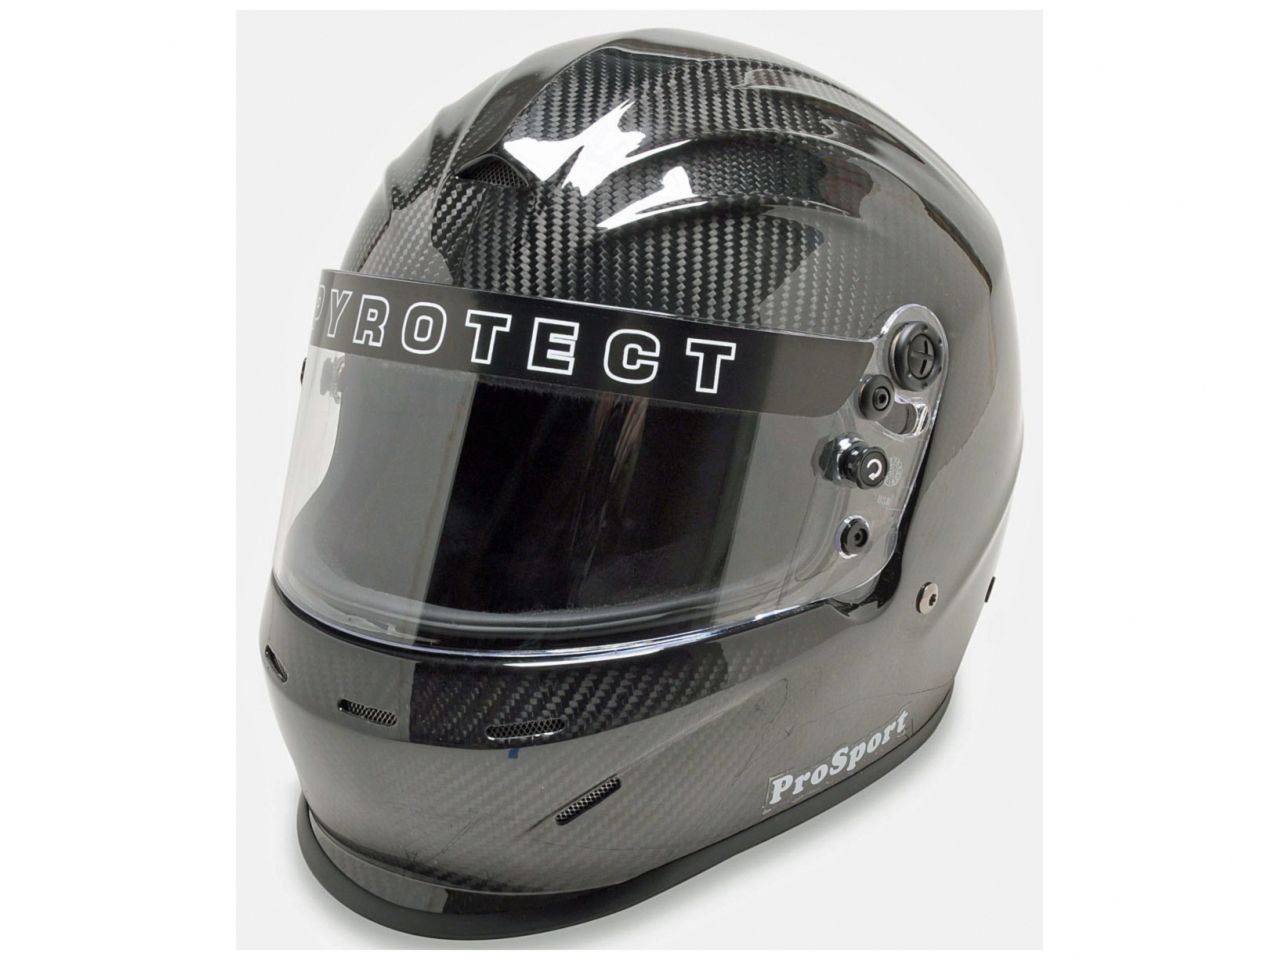 Pyrotect Prosport DB F/F Helmet, SA2015 Rated, Large, Carbon